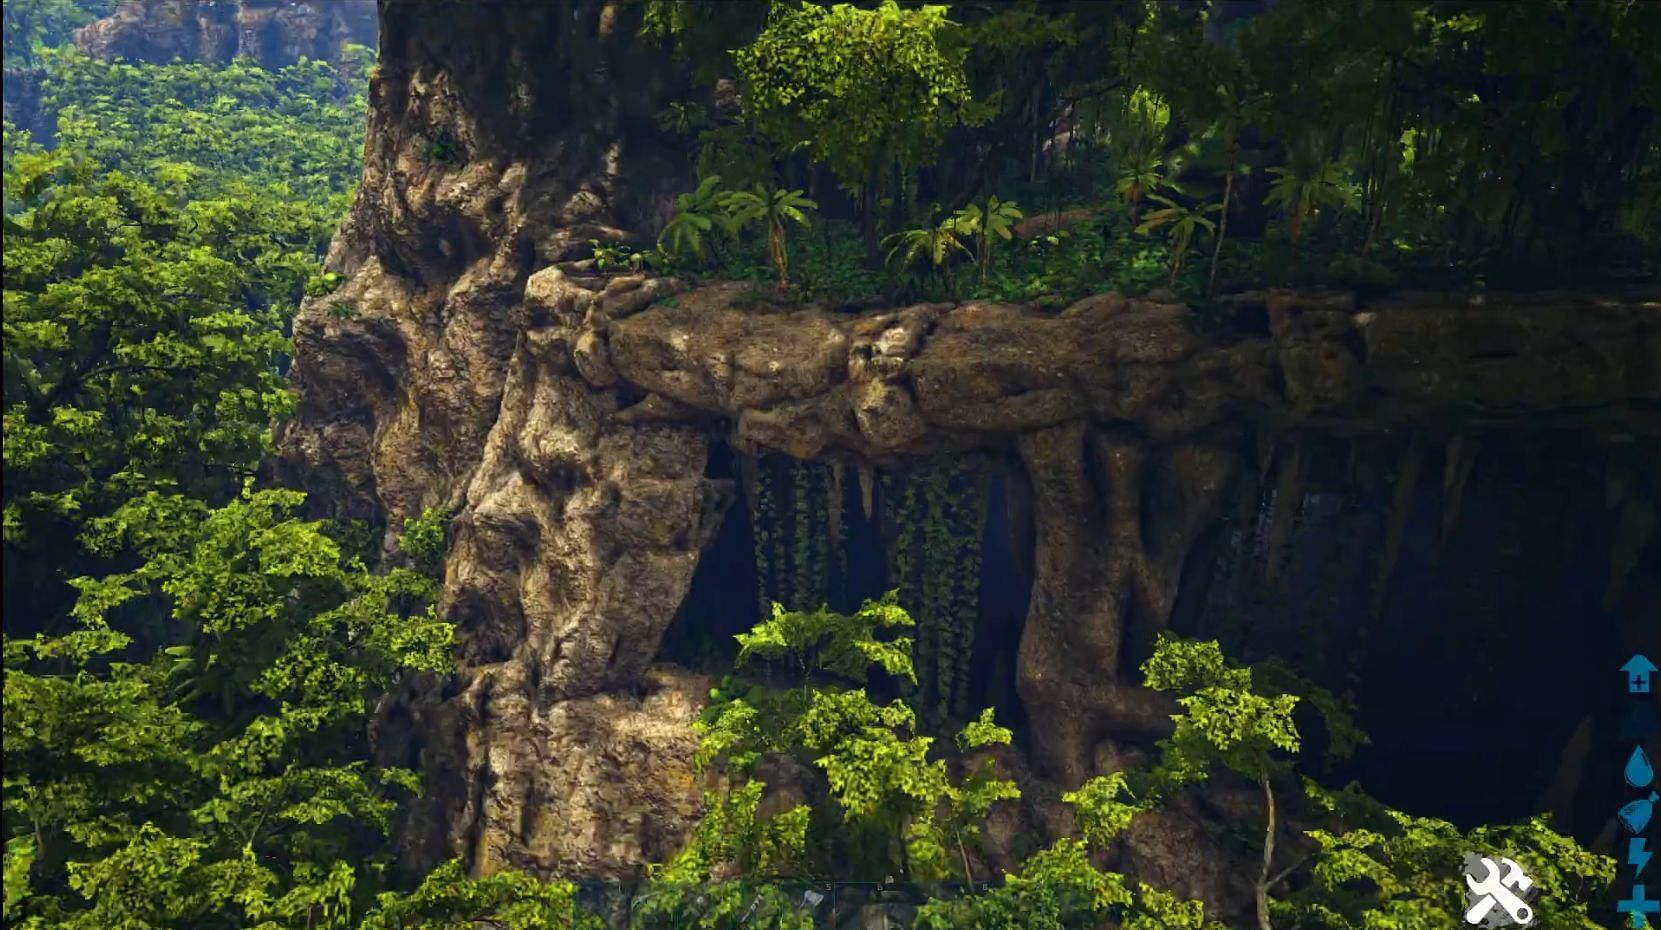 Entrance to the Gloom Grove Cave (Image via Ark: Survival Guide on YouTube)